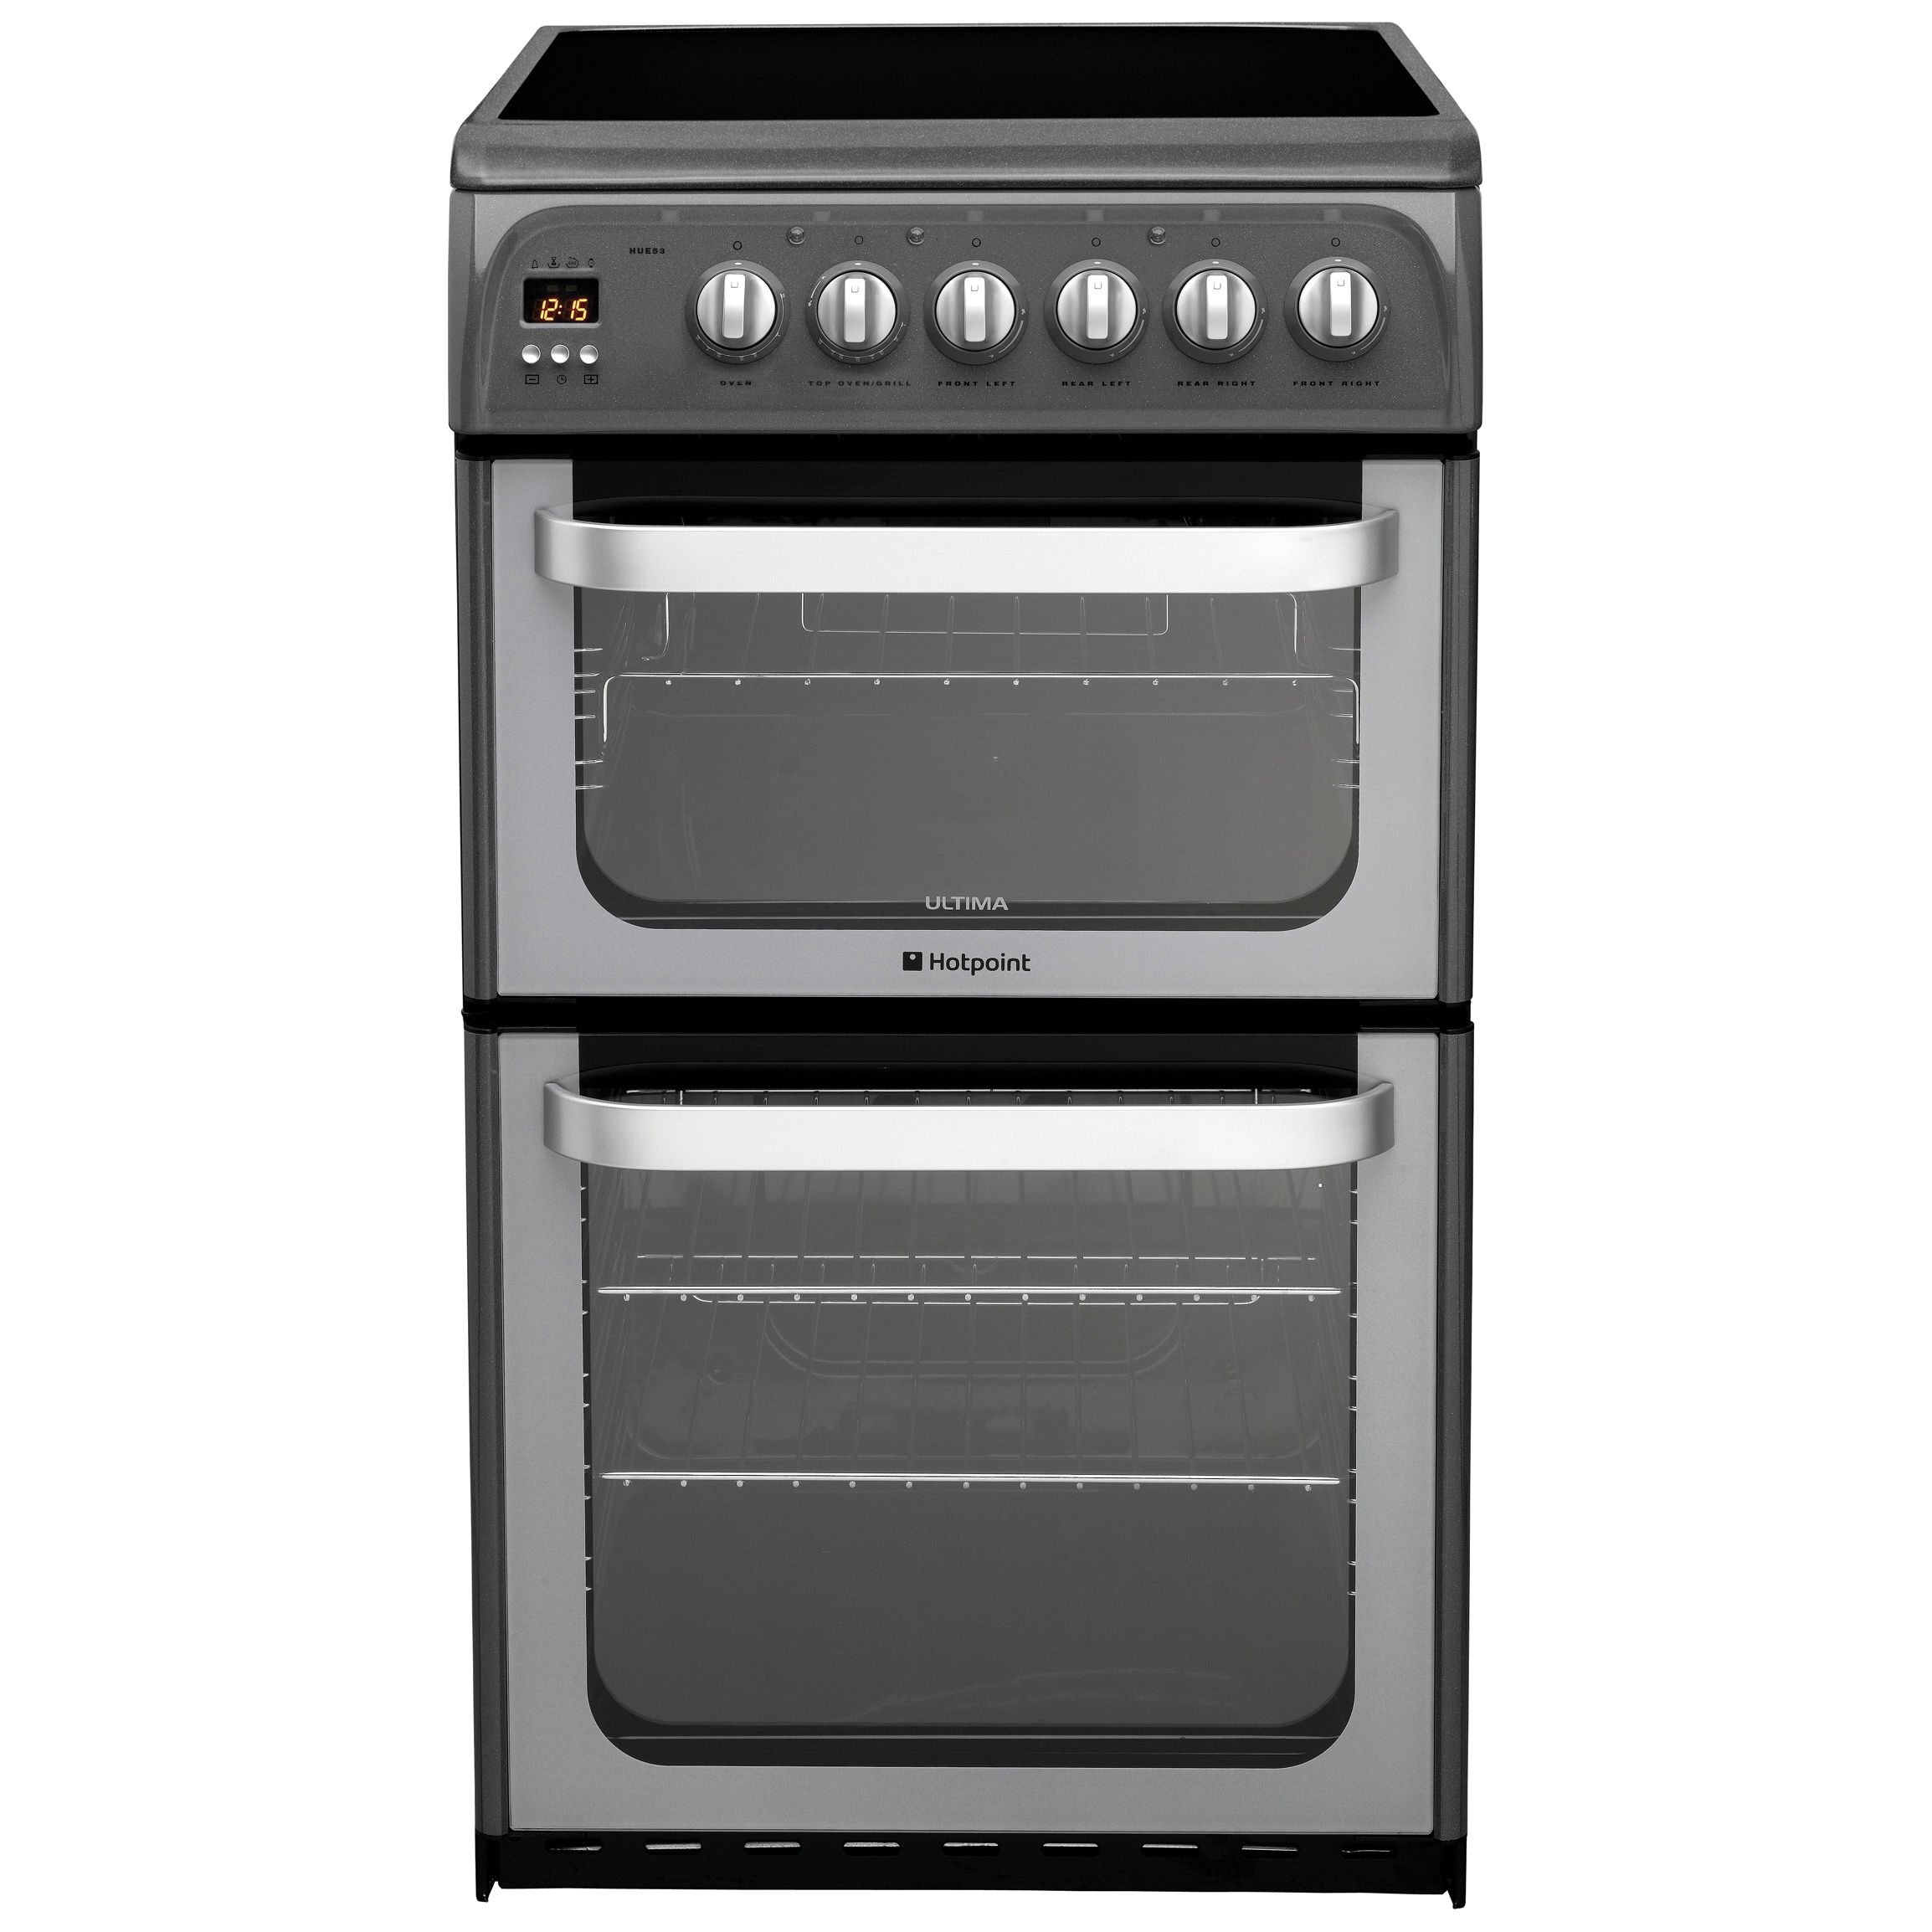 Hotpoint Ultima HUE53G Electric Cooker, Graphite at John Lewis